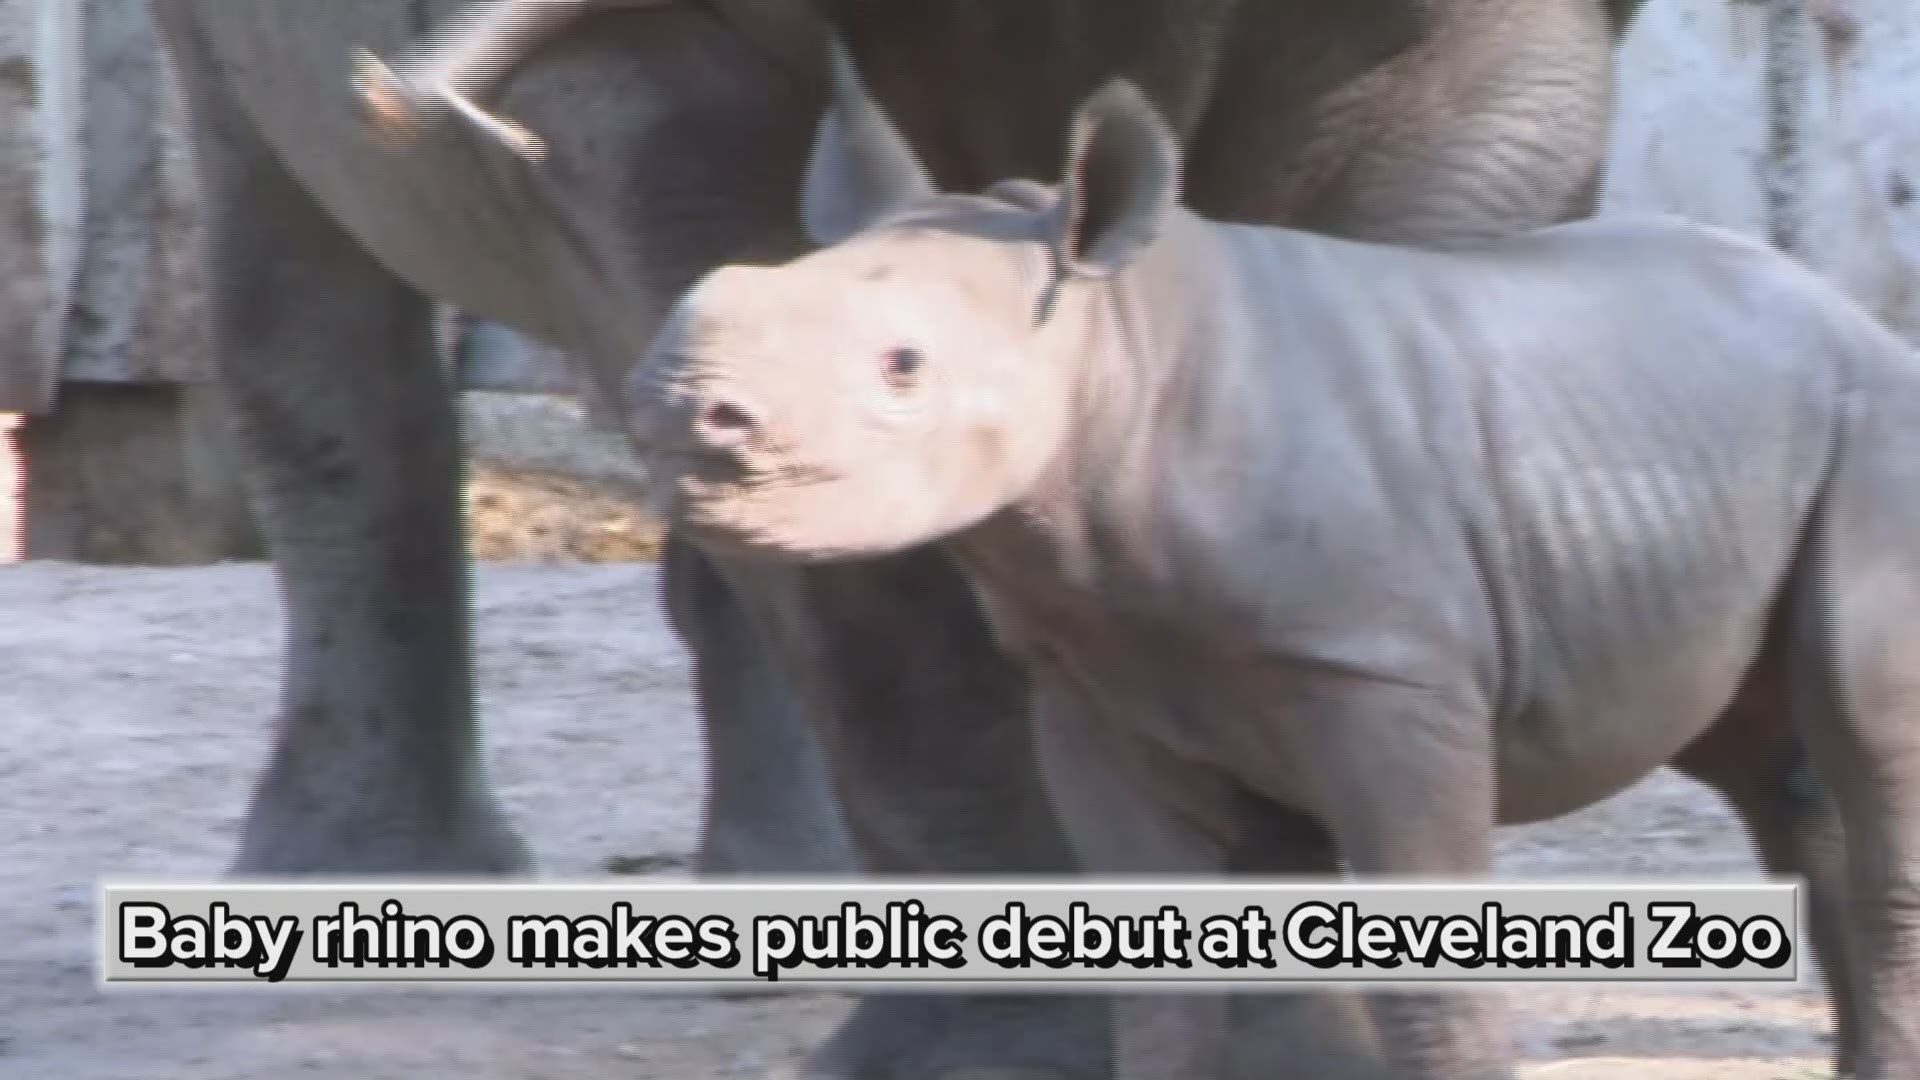 Baby rhino makes public debut at Cleveland Zoo: Here's how you can help choose her name